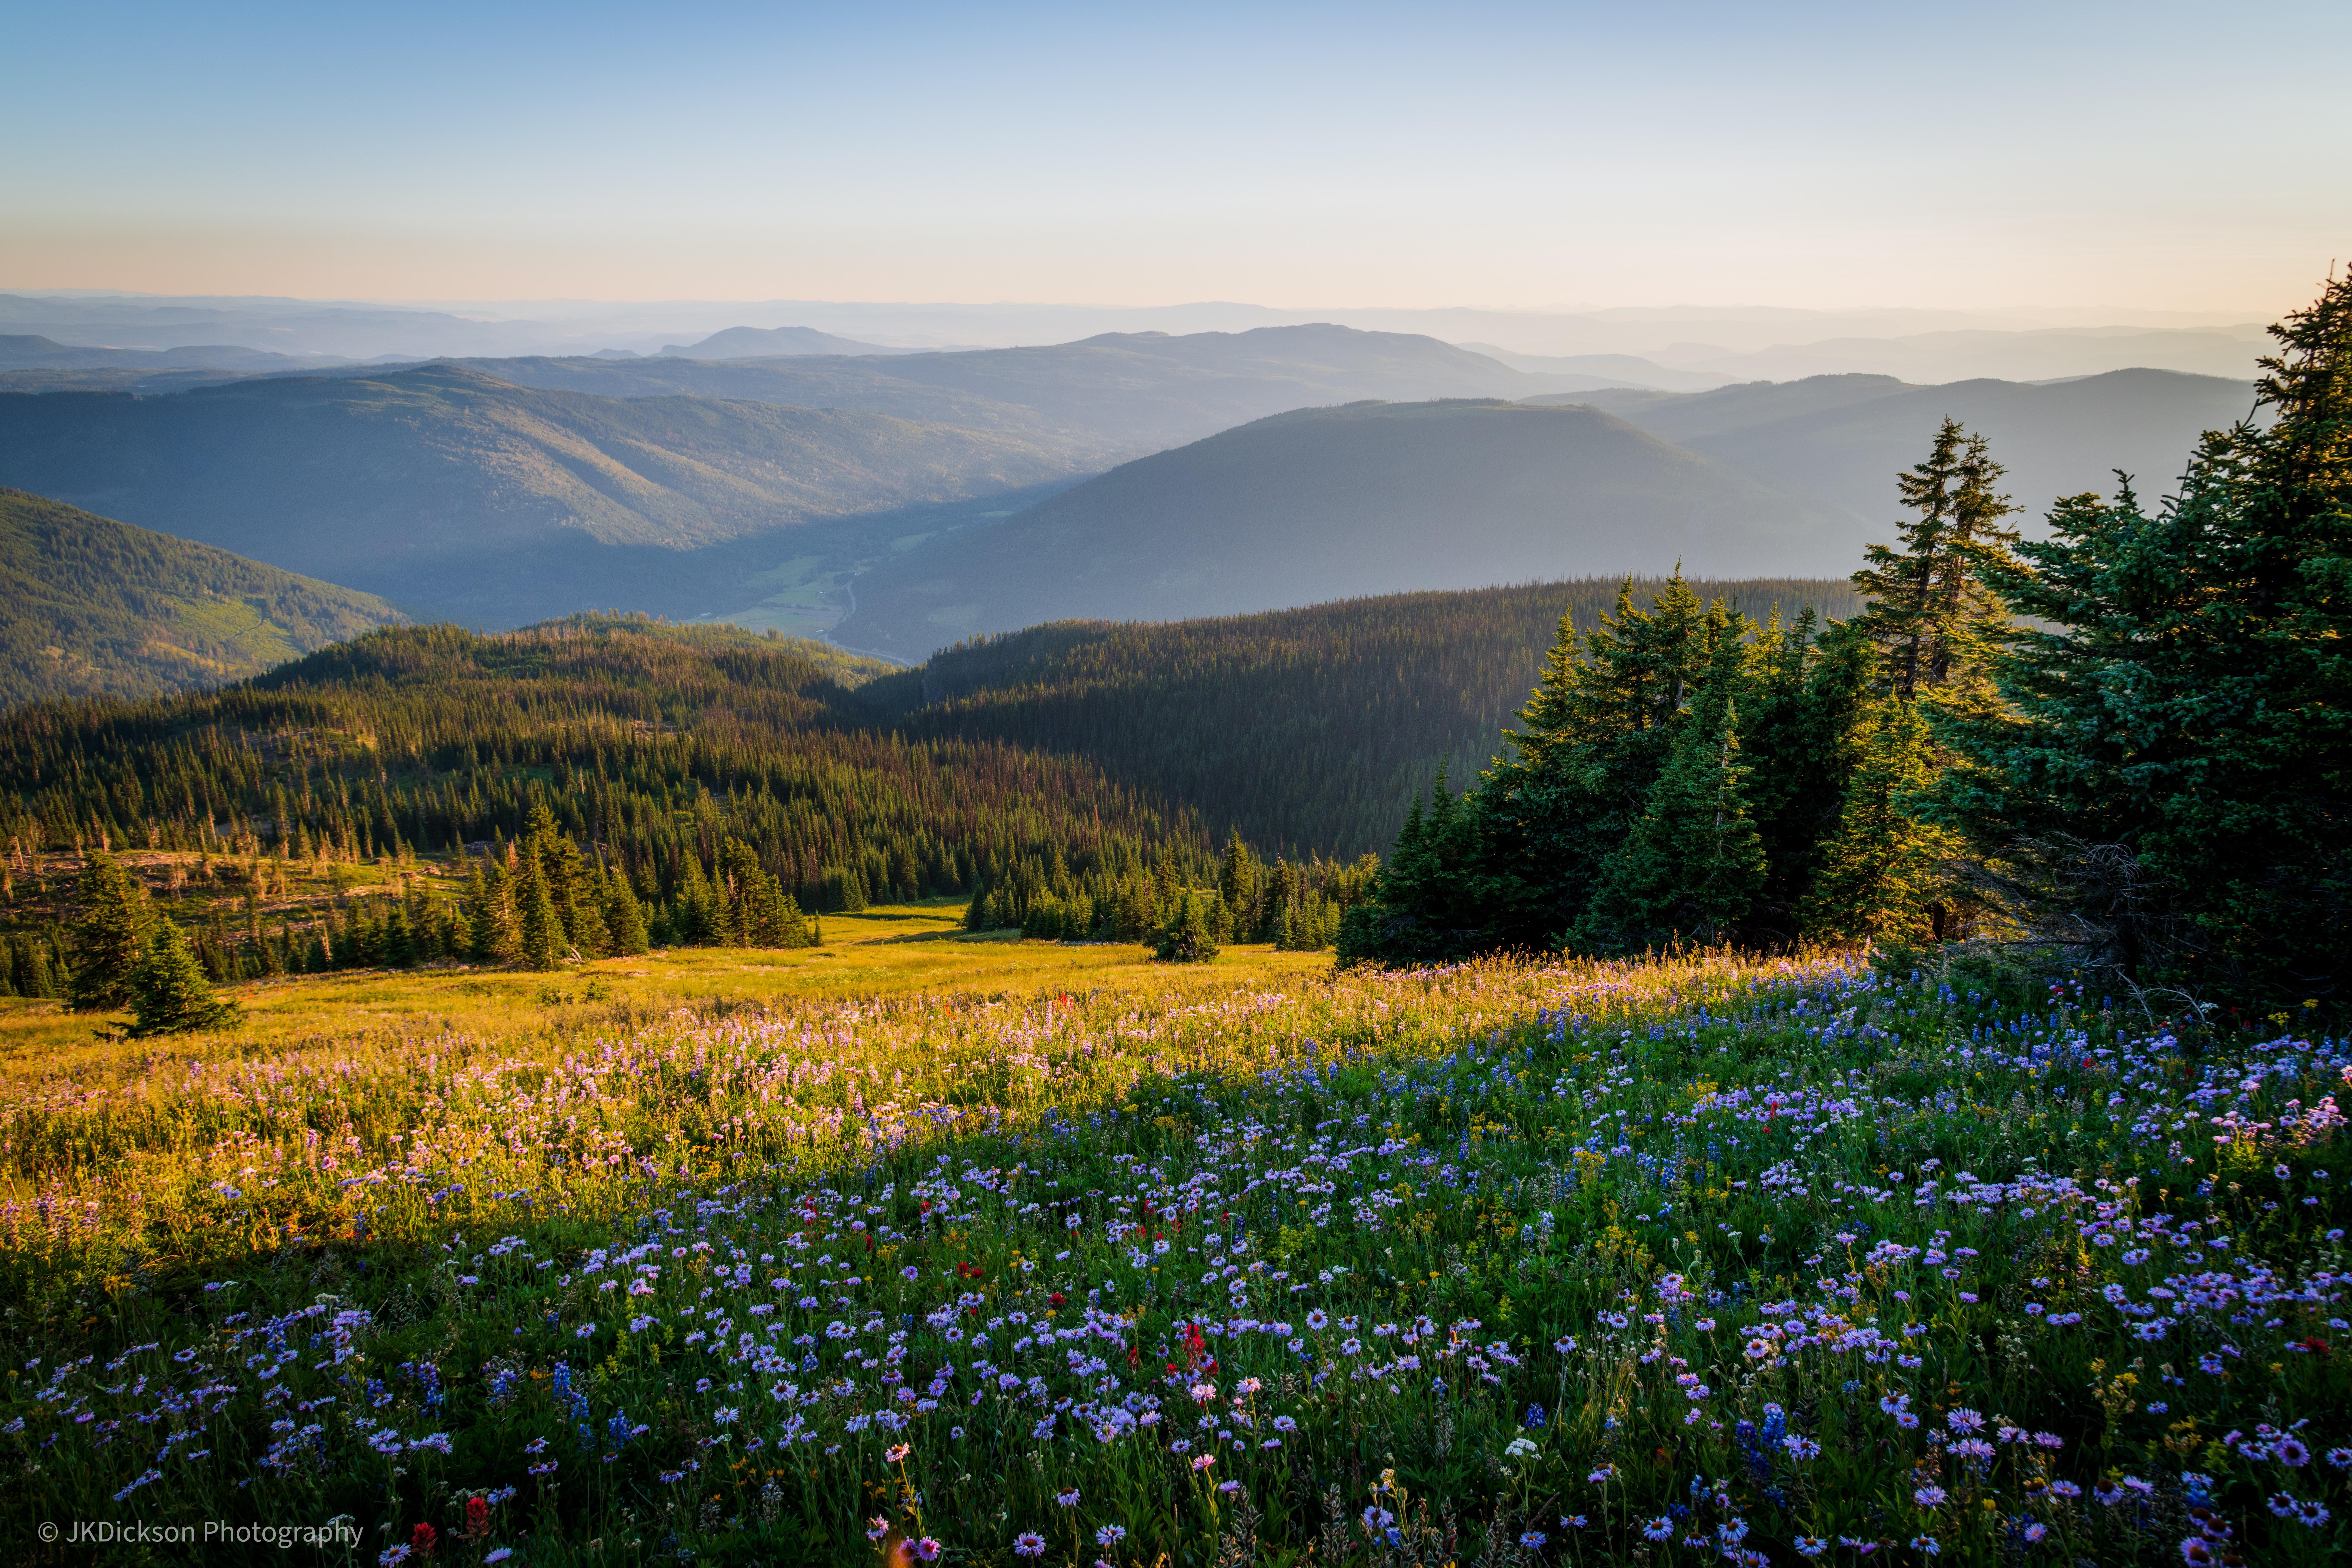 Landscape Mountain View Forest Nature British Columbia Canada Flowers Pine Trees Field Mountains 8157x5438